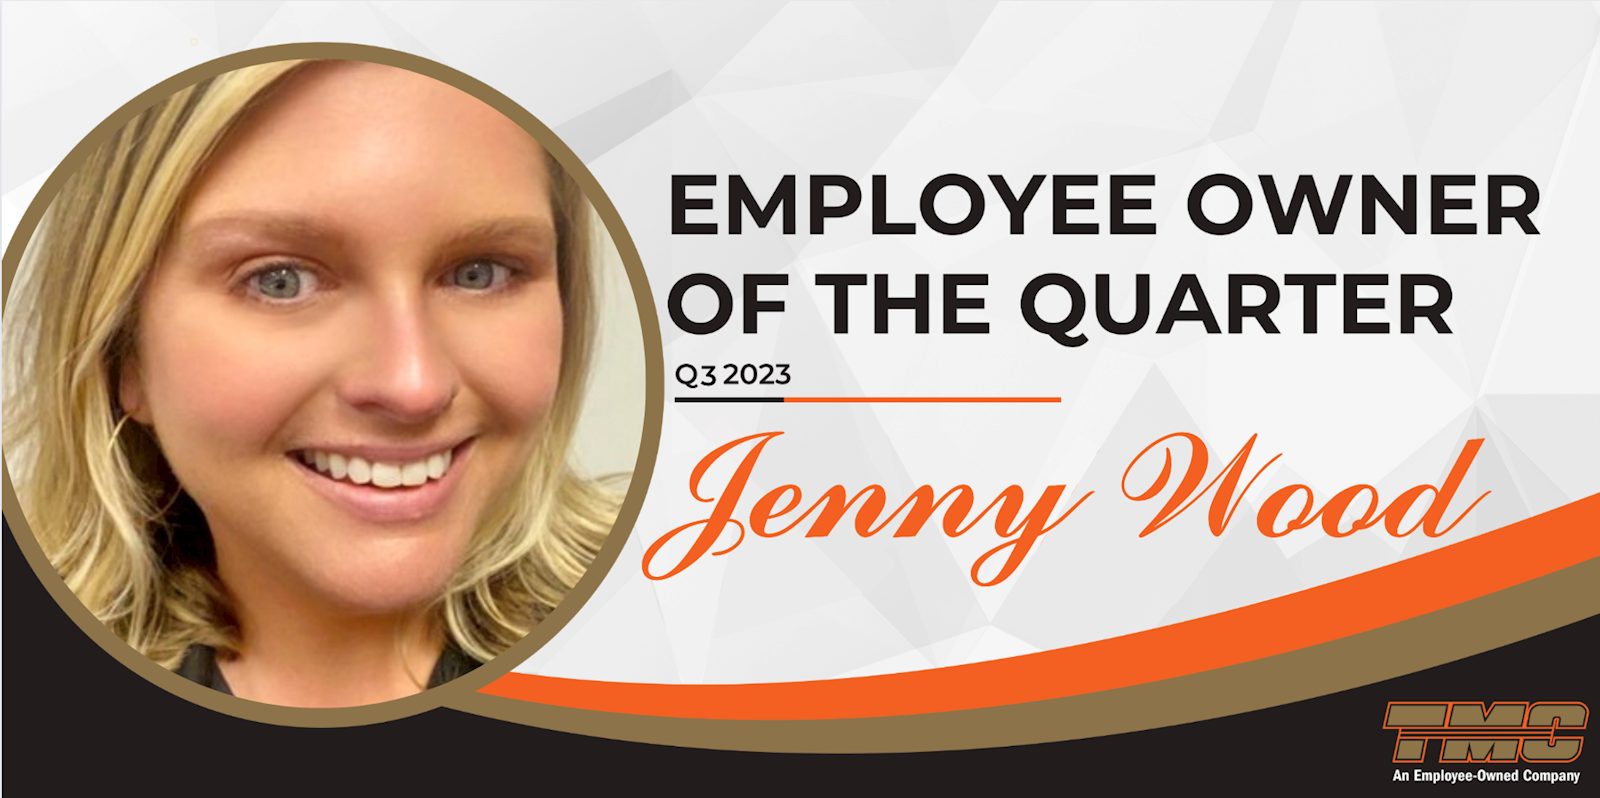 Jenny Wood Named Employee Owner of the Quarter